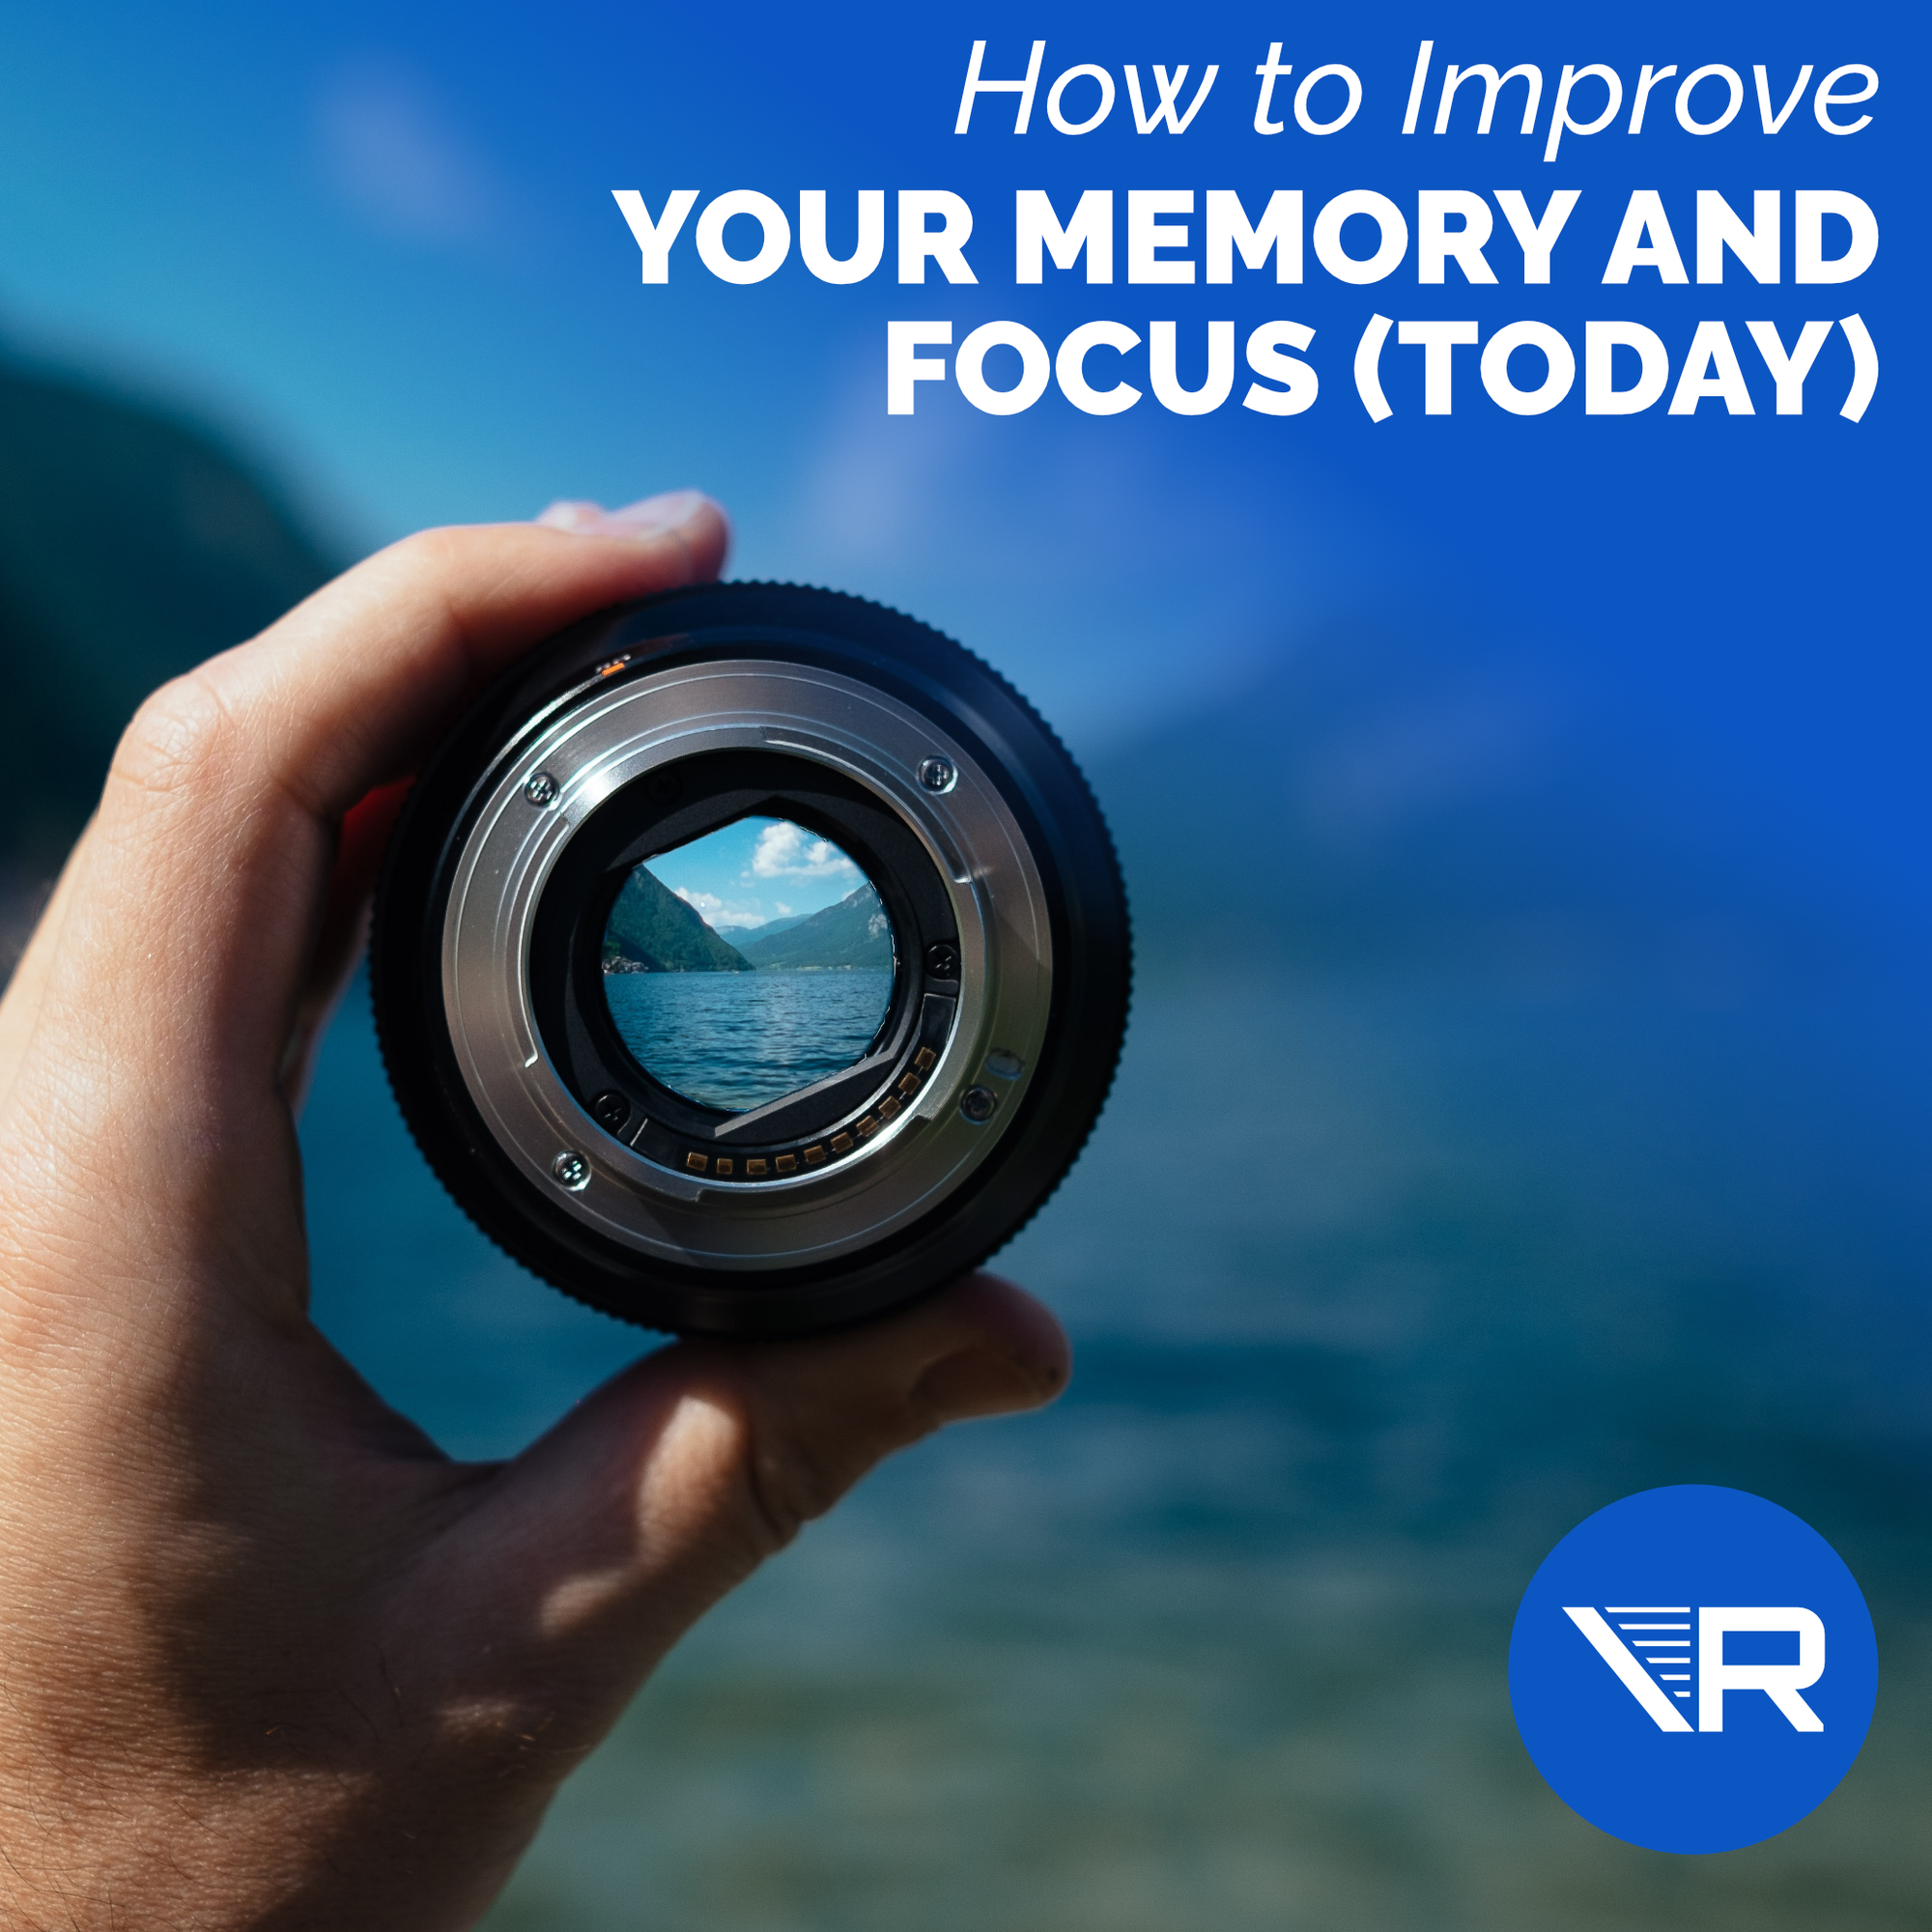 Difficulty concentrating? Here's how to improve your focus